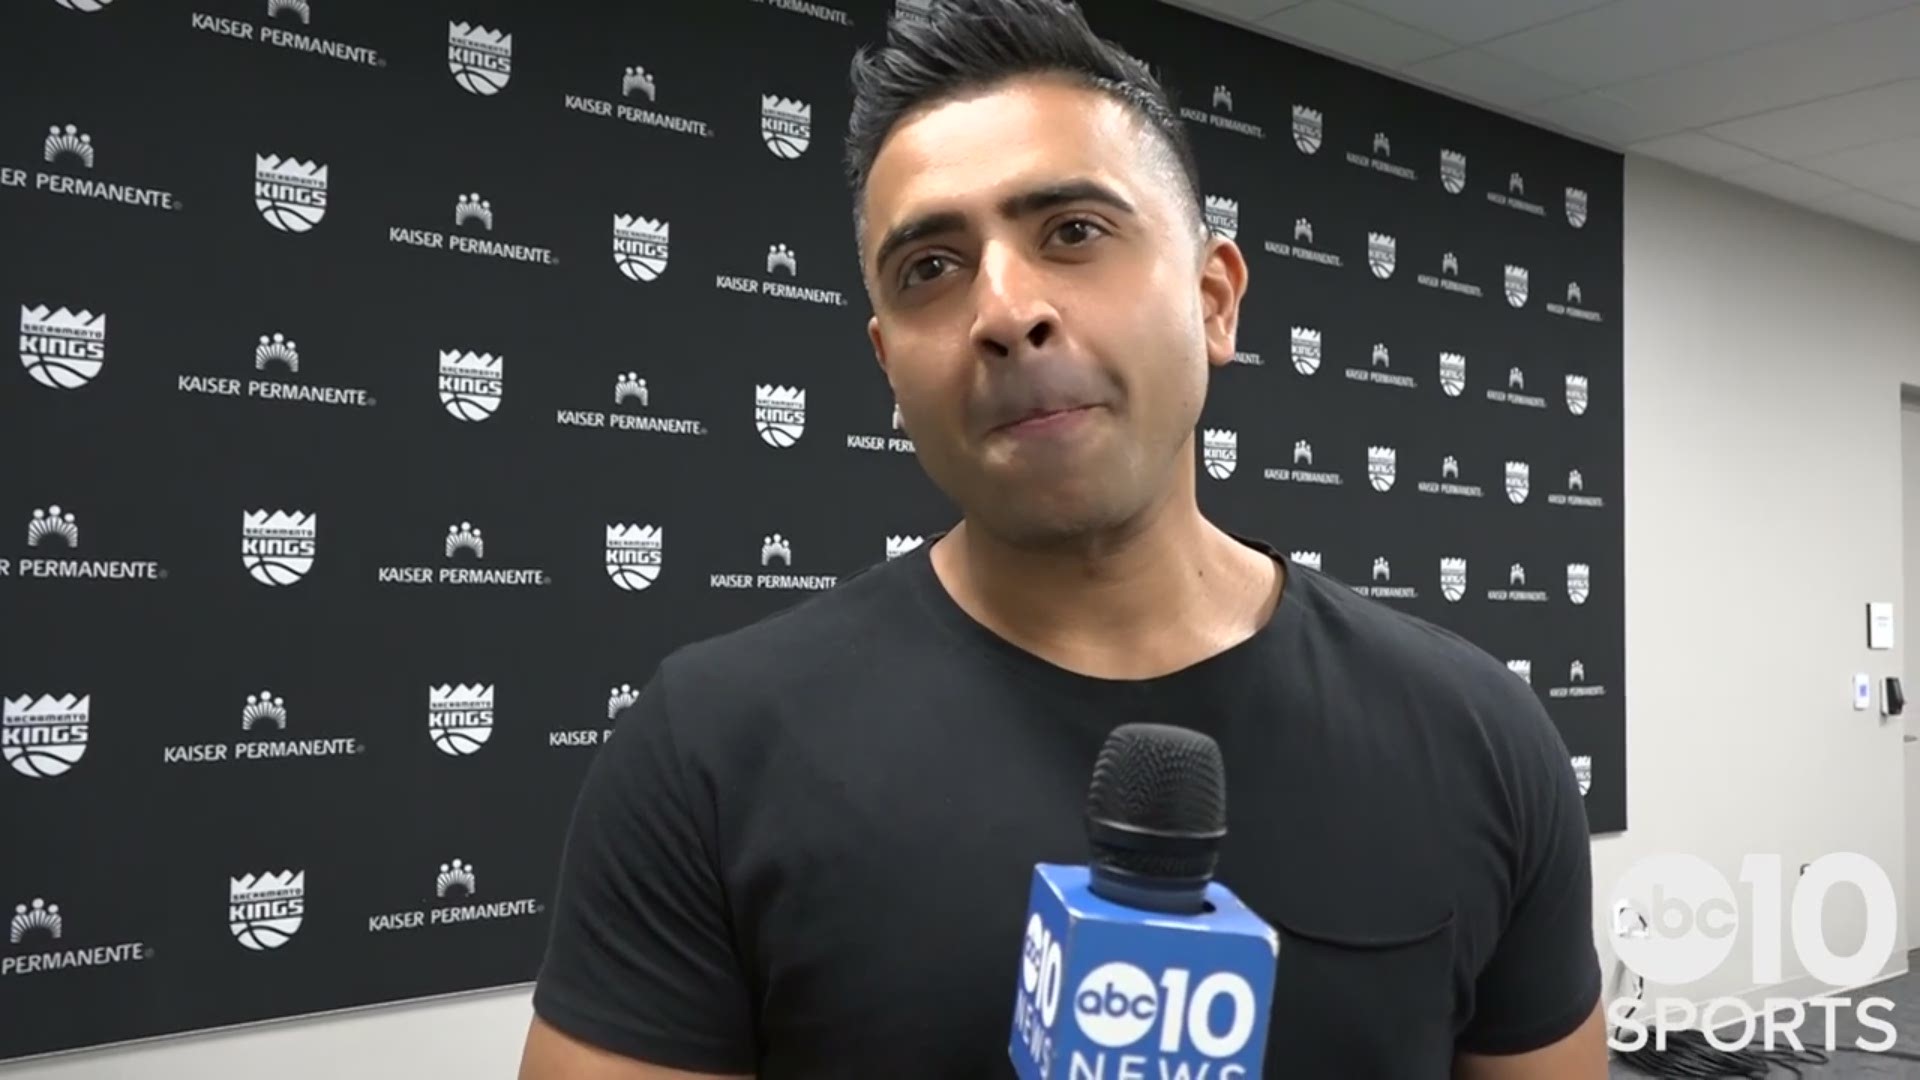 International singer and songwriter Jay Sean talks to ABC10's Sean Cunningham about his outdoor concert at Sacramento's California Classic NBA summer league, his connection to the Kings organization and what the NBA's preseason games in India coming up in October will mean to that country.